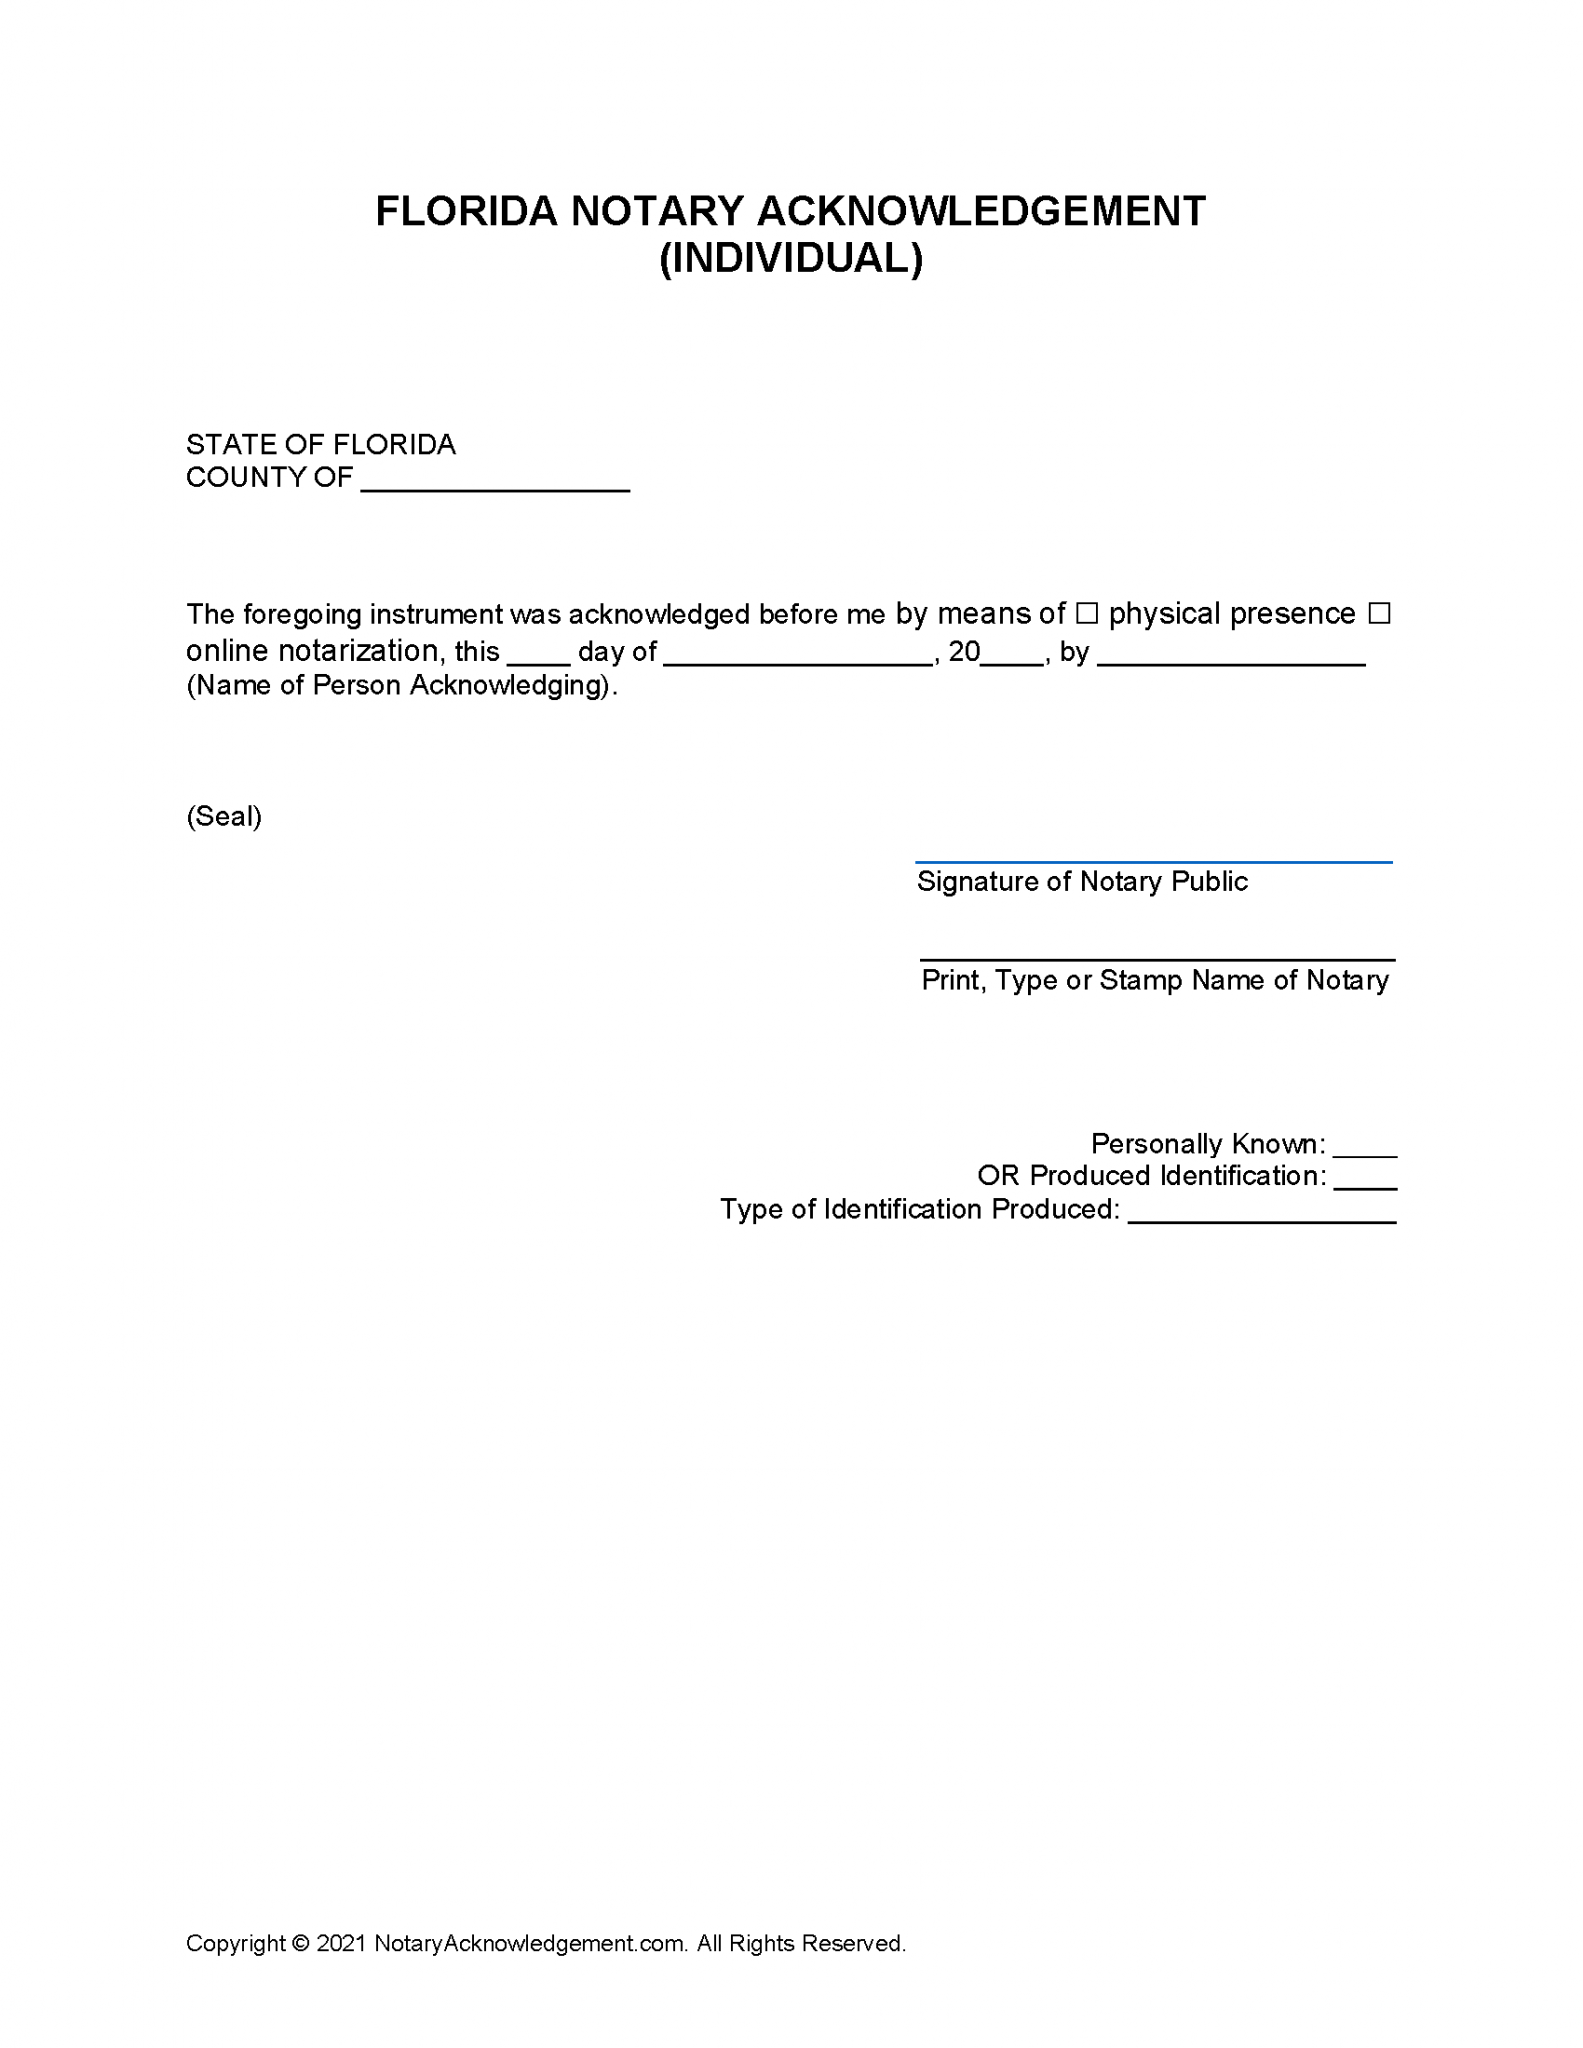 Free Florida Notary Acknowledgement Individual PDF Word